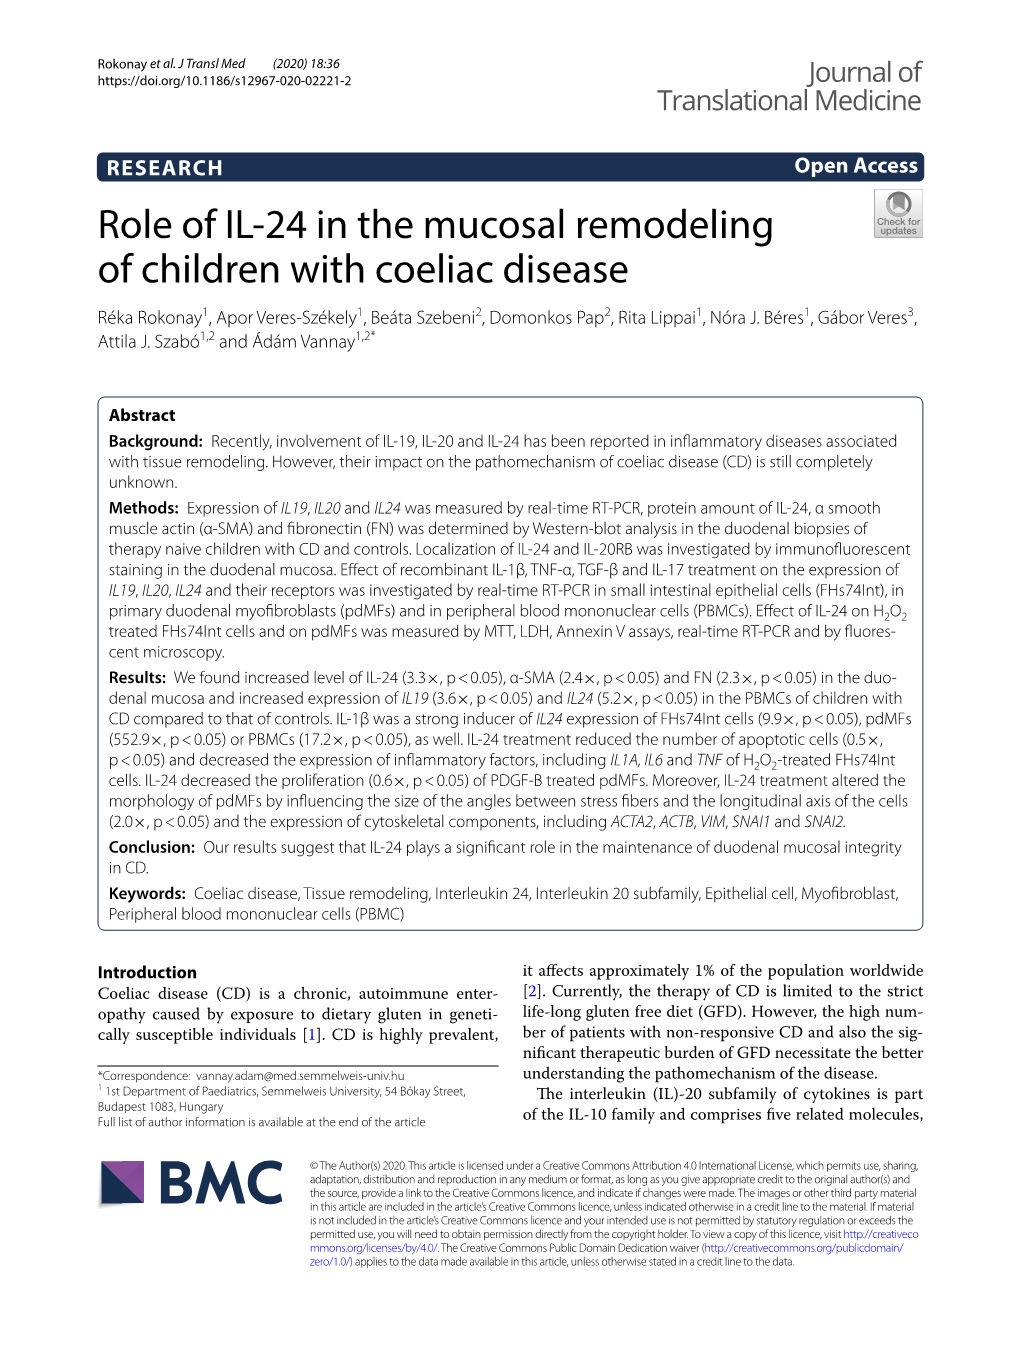 Role of IL-24 in the Mucosal Remodeling of Children with Coeliac Disease